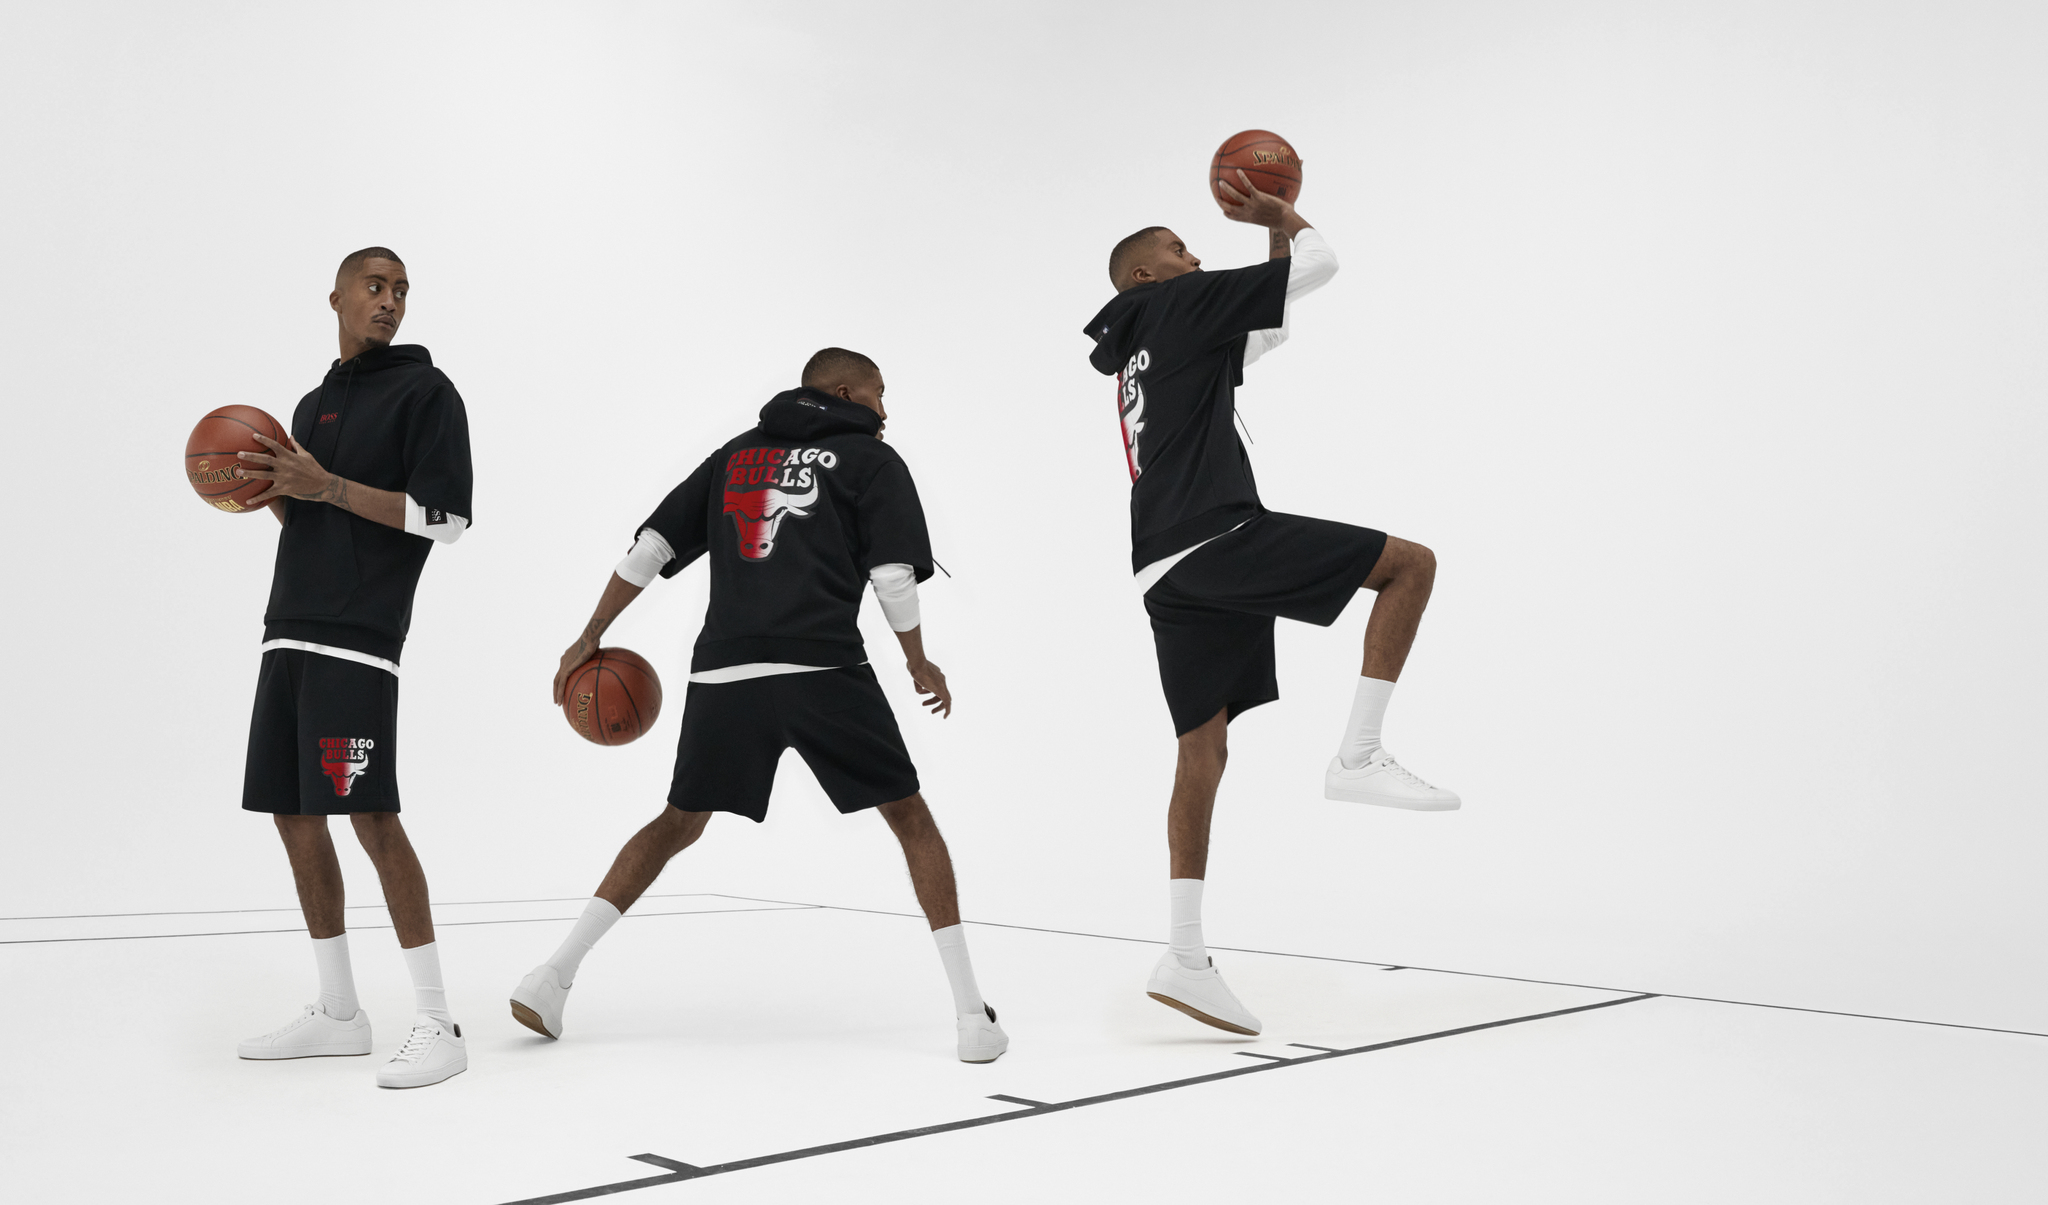 BOSS and NBA LAUNCH SECOND co-branded CAPSULE collection